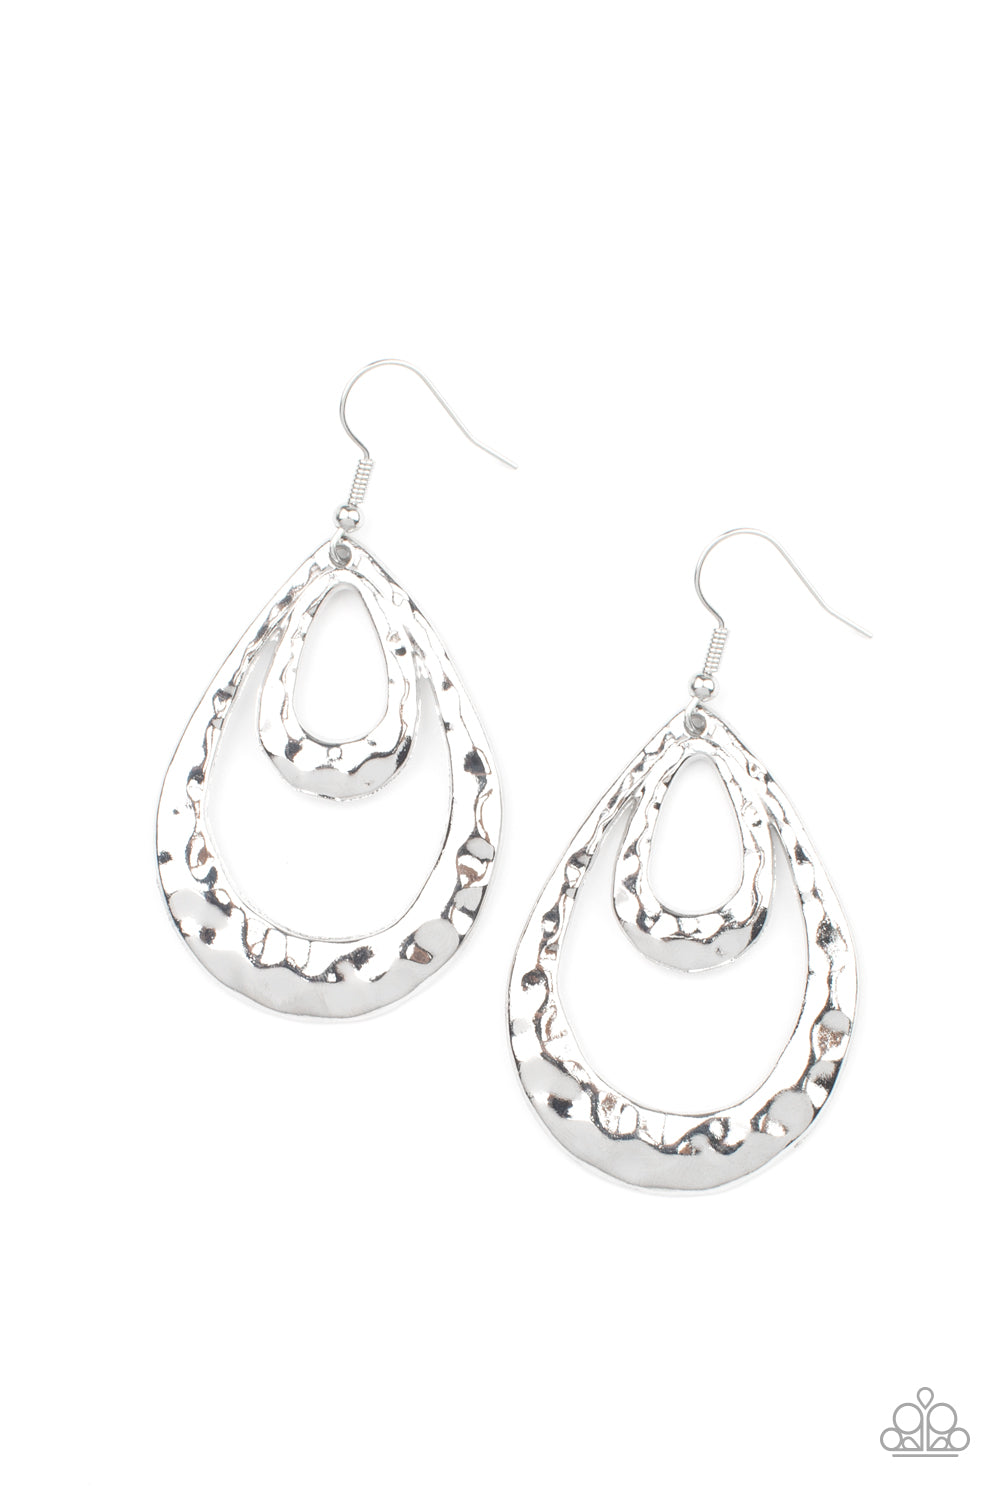 Museum Muse Silver Earring - Paparazzi Accessories. Hammered silver teardrops join into an edgy layered lure, creating an intense industrial display. Earring attaches to a standard fishhook fitting.  All Paparazzi Accessories are lead free and nickel free!  Sold as one pair of earrings.